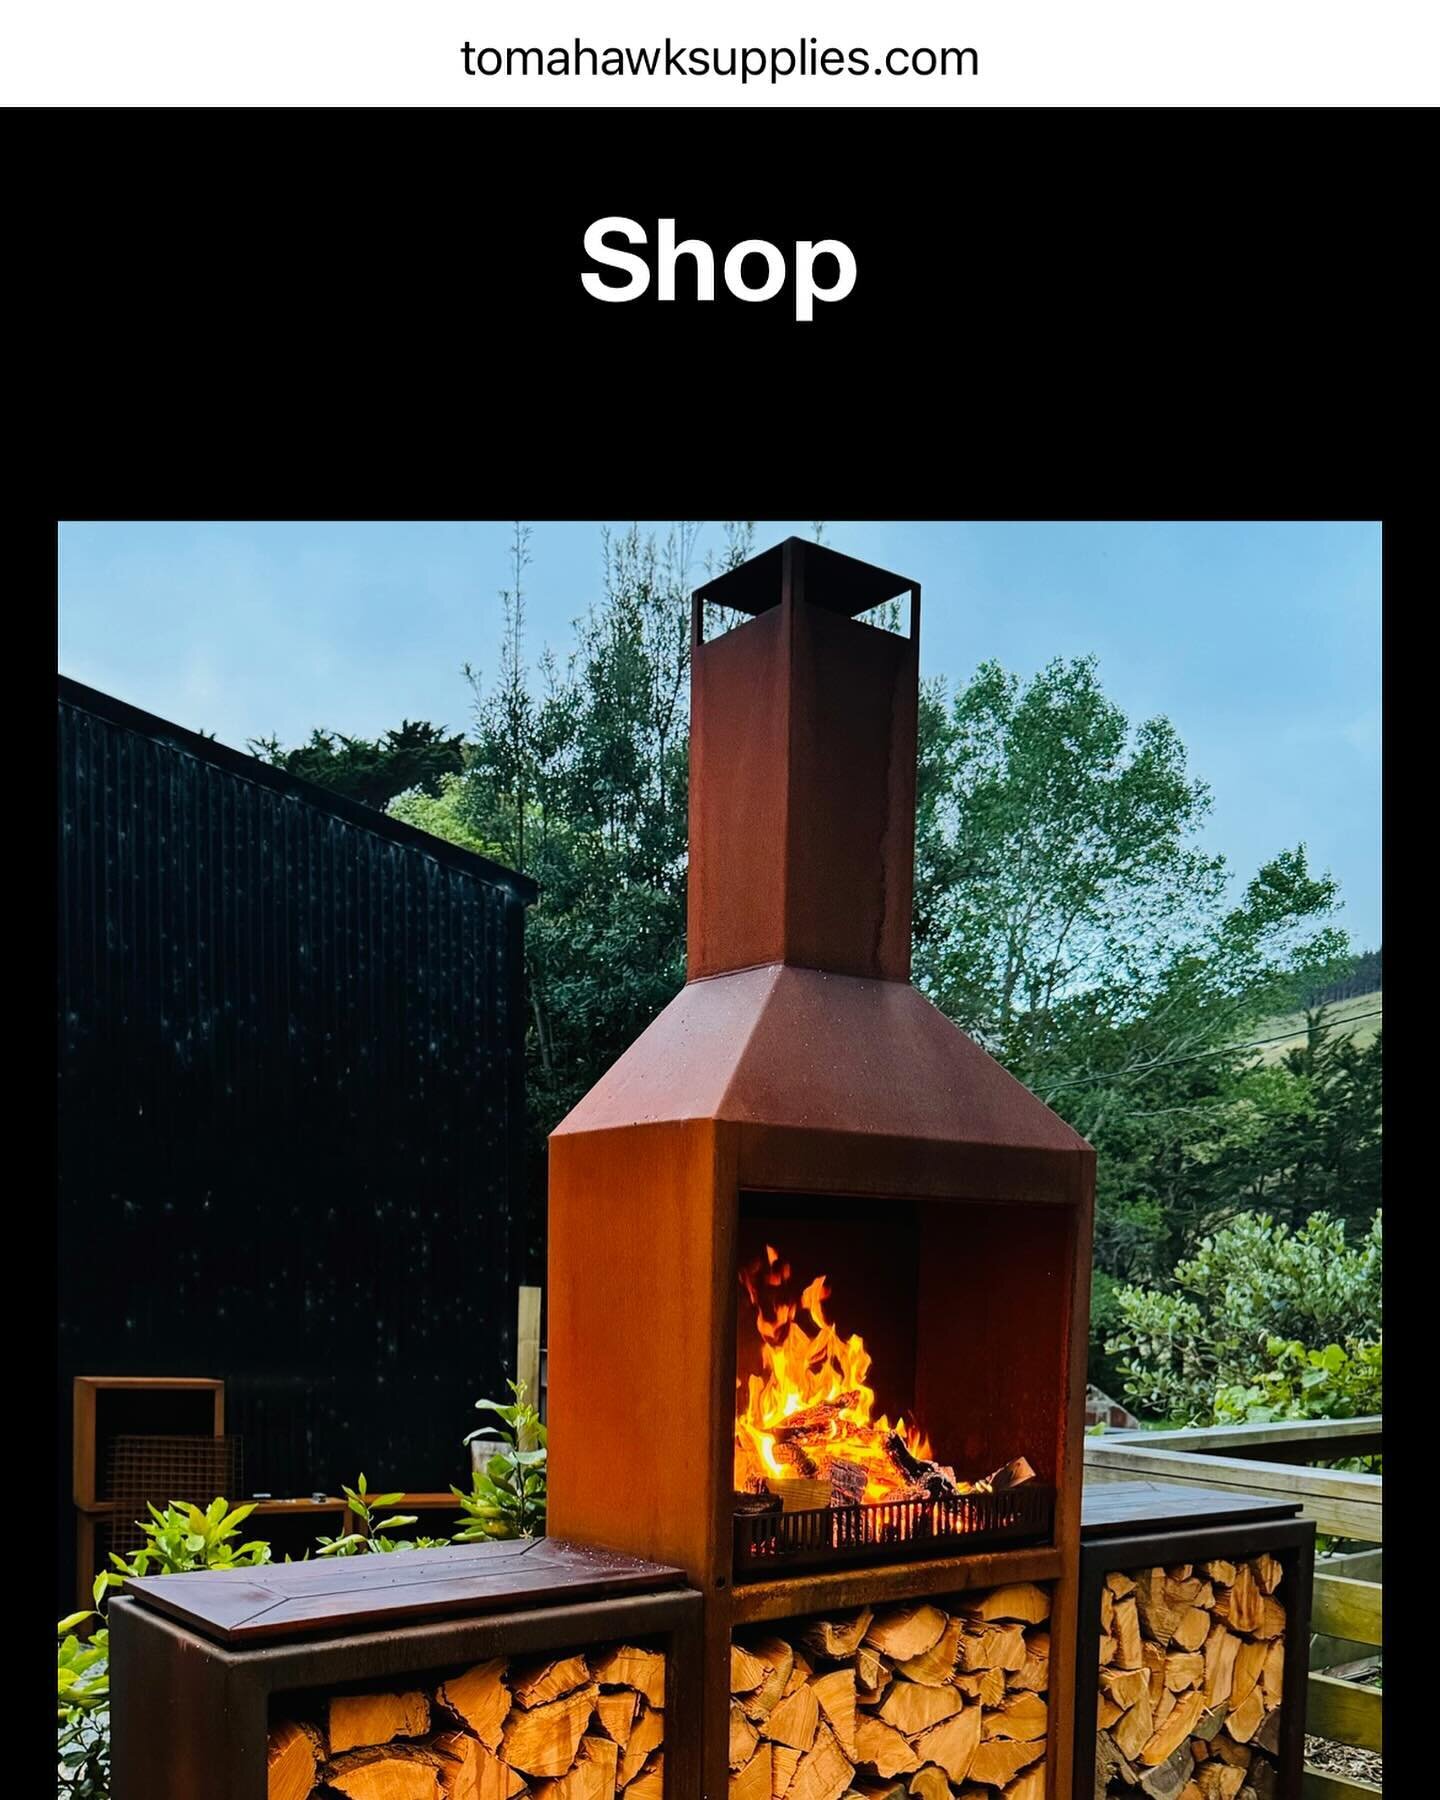 Even though the fitout and custom furniture side of tomahawk is dead in the water, I&rsquo;m going to do some products on the side. Outdoor fires, baths, showers, kitchens etc follow along @tomahawksupplies or check out the website www.tomahawksuppli